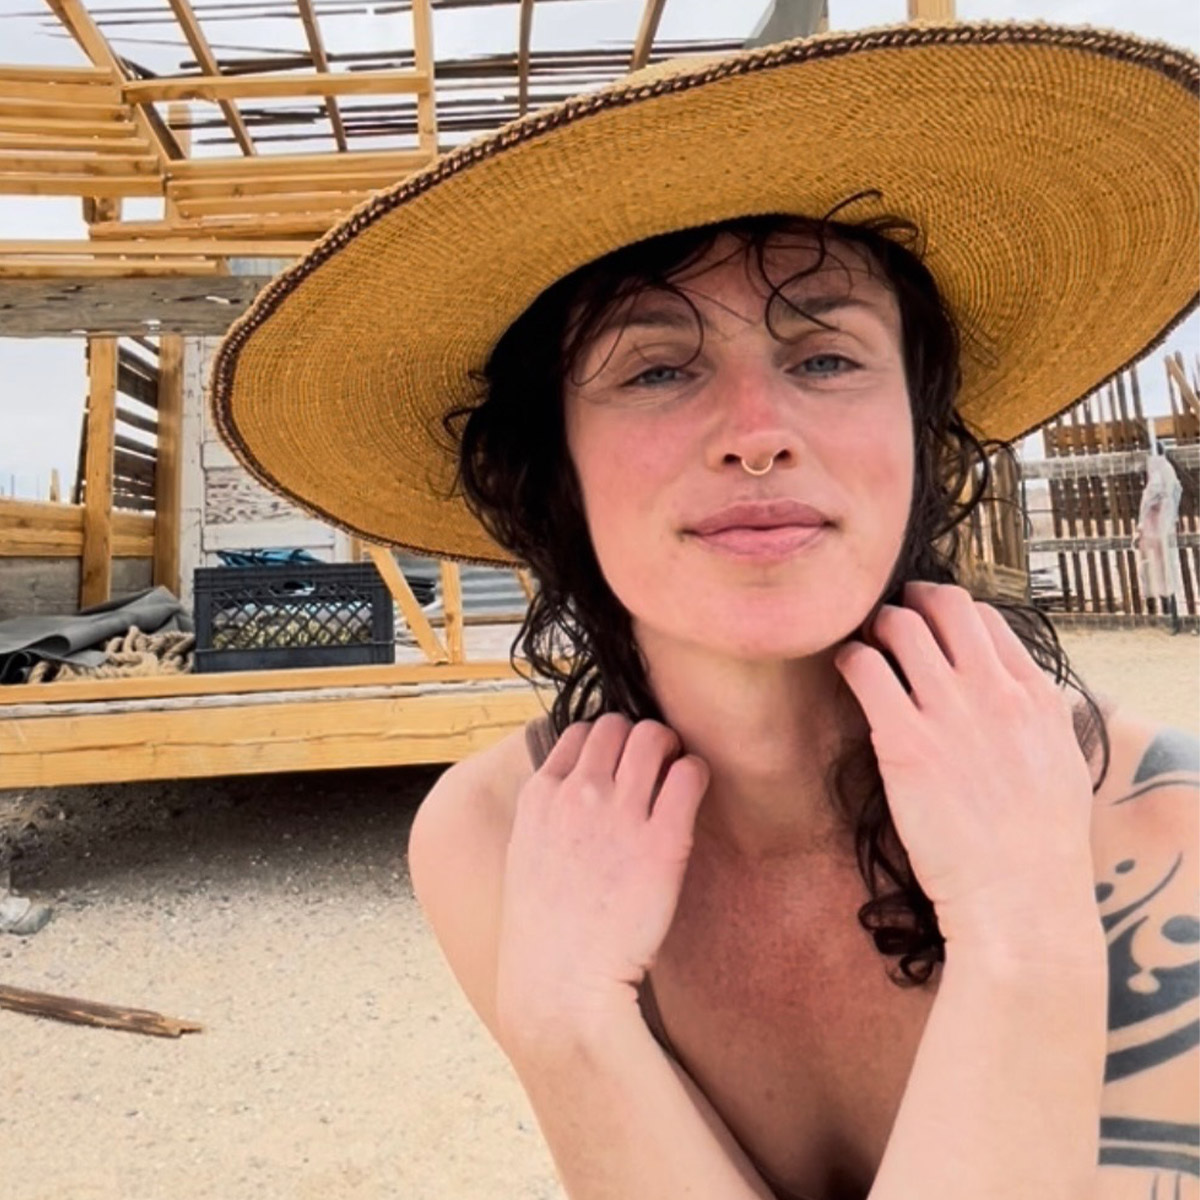 Renee Sills color portrait. Renee is posed outside at a beach, wearing a sun hat and is smiling.